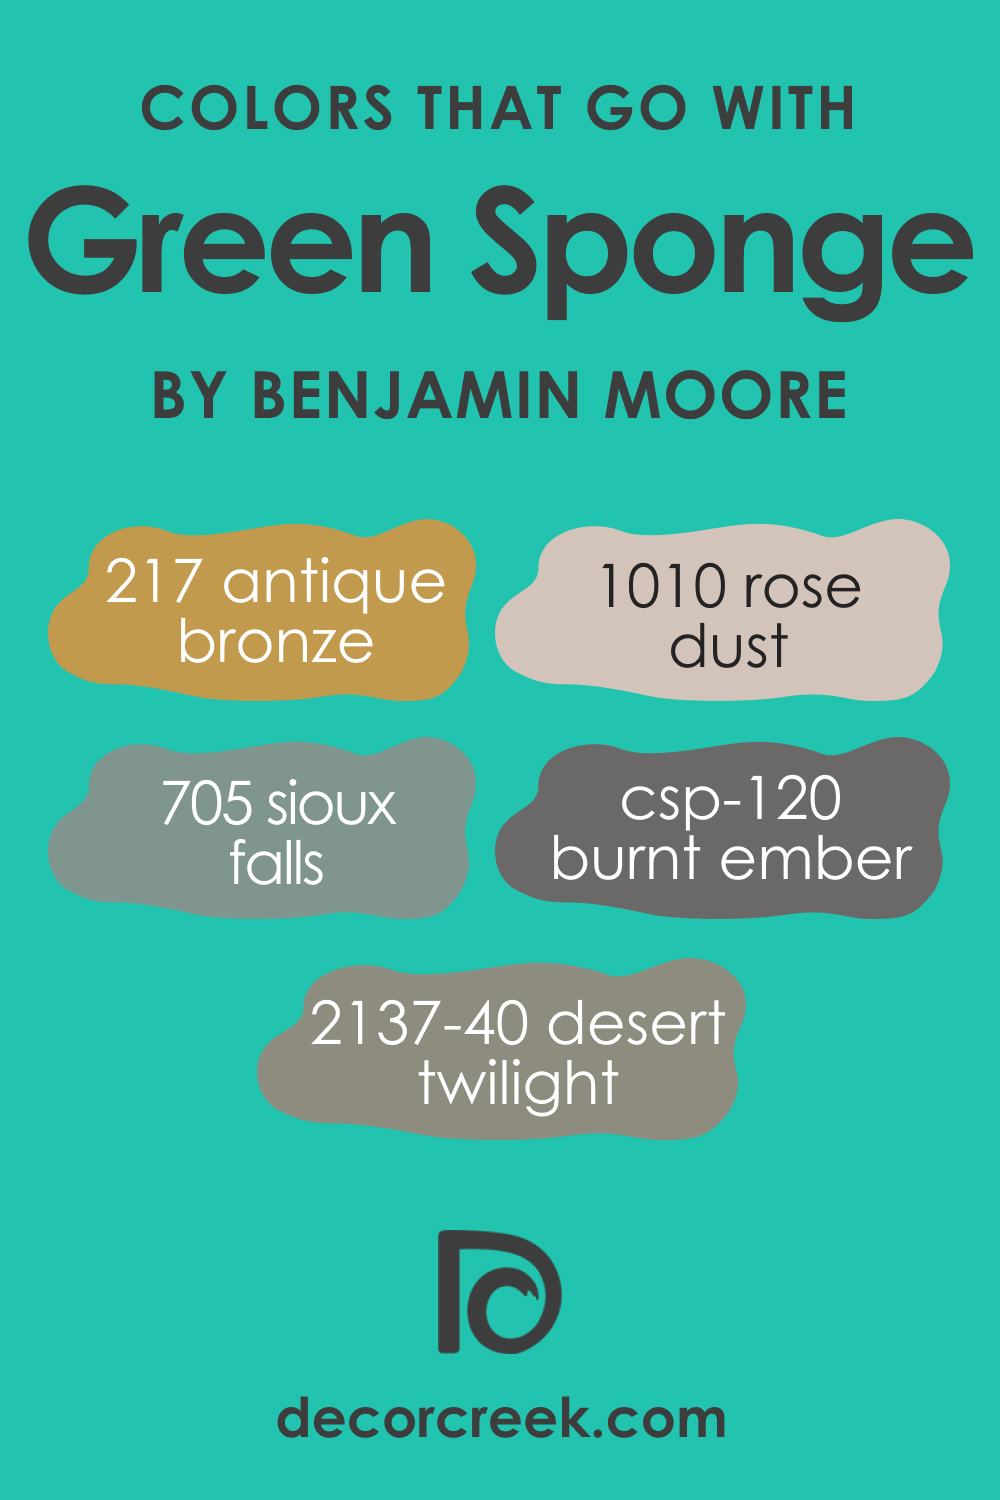 Colors That Go With Green Sponge 2046-40